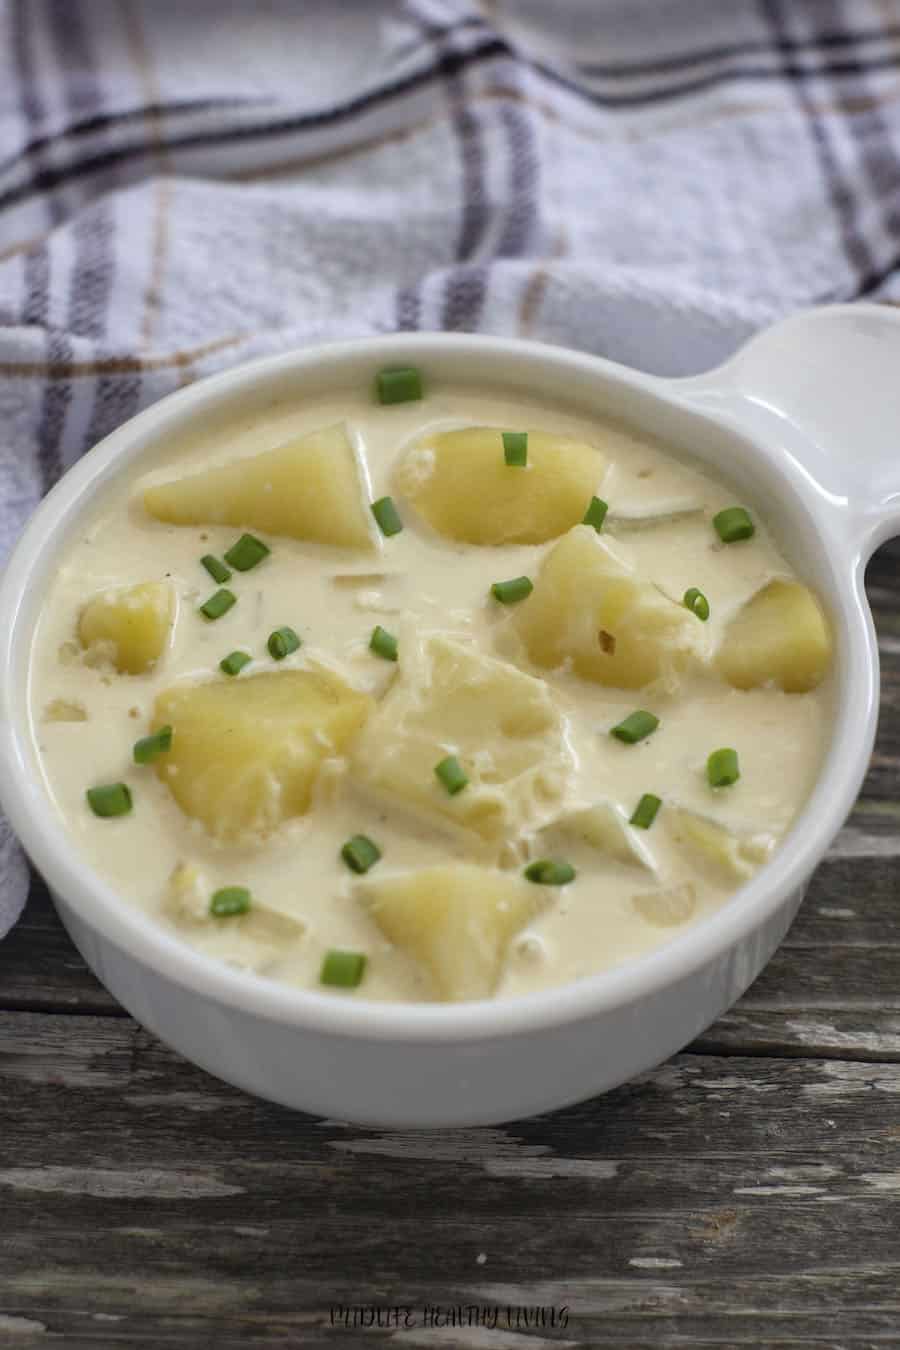 Here's a top down look at a full bowl of tasty potato soup! 